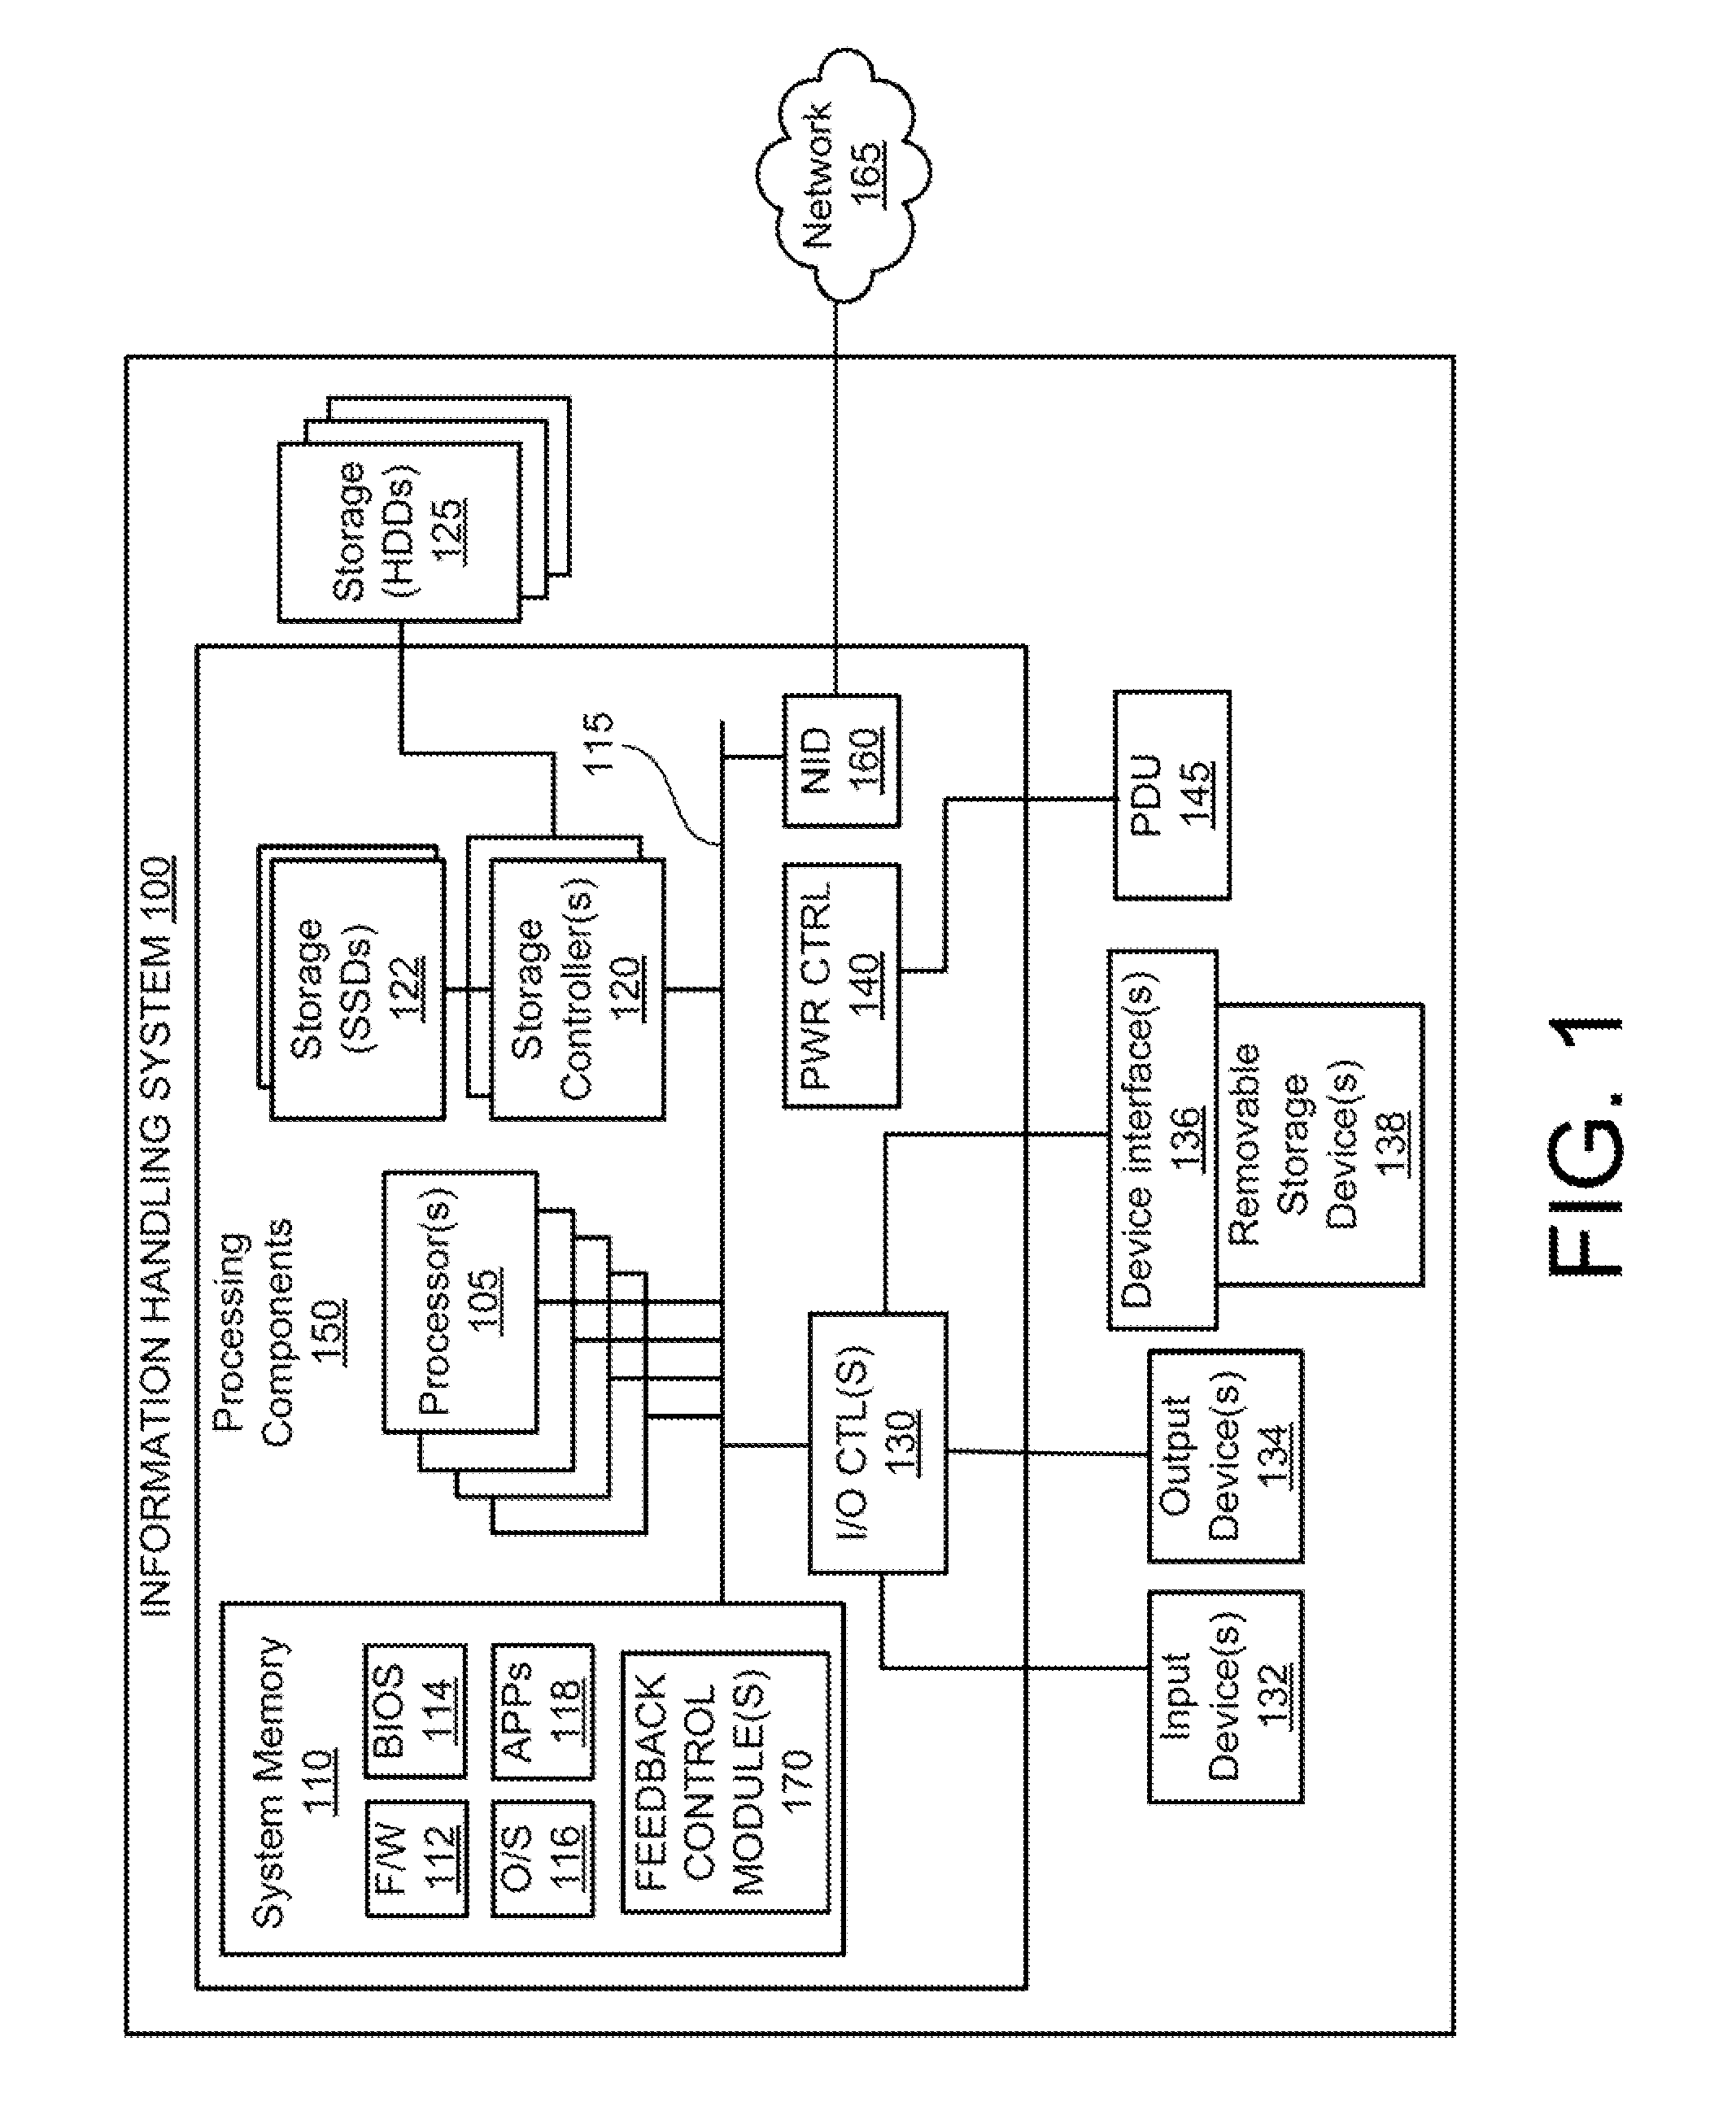 System for Cooling Hard Disk Drives Using Vapor Momentum Driven By Boiling of Dielectric Liquid